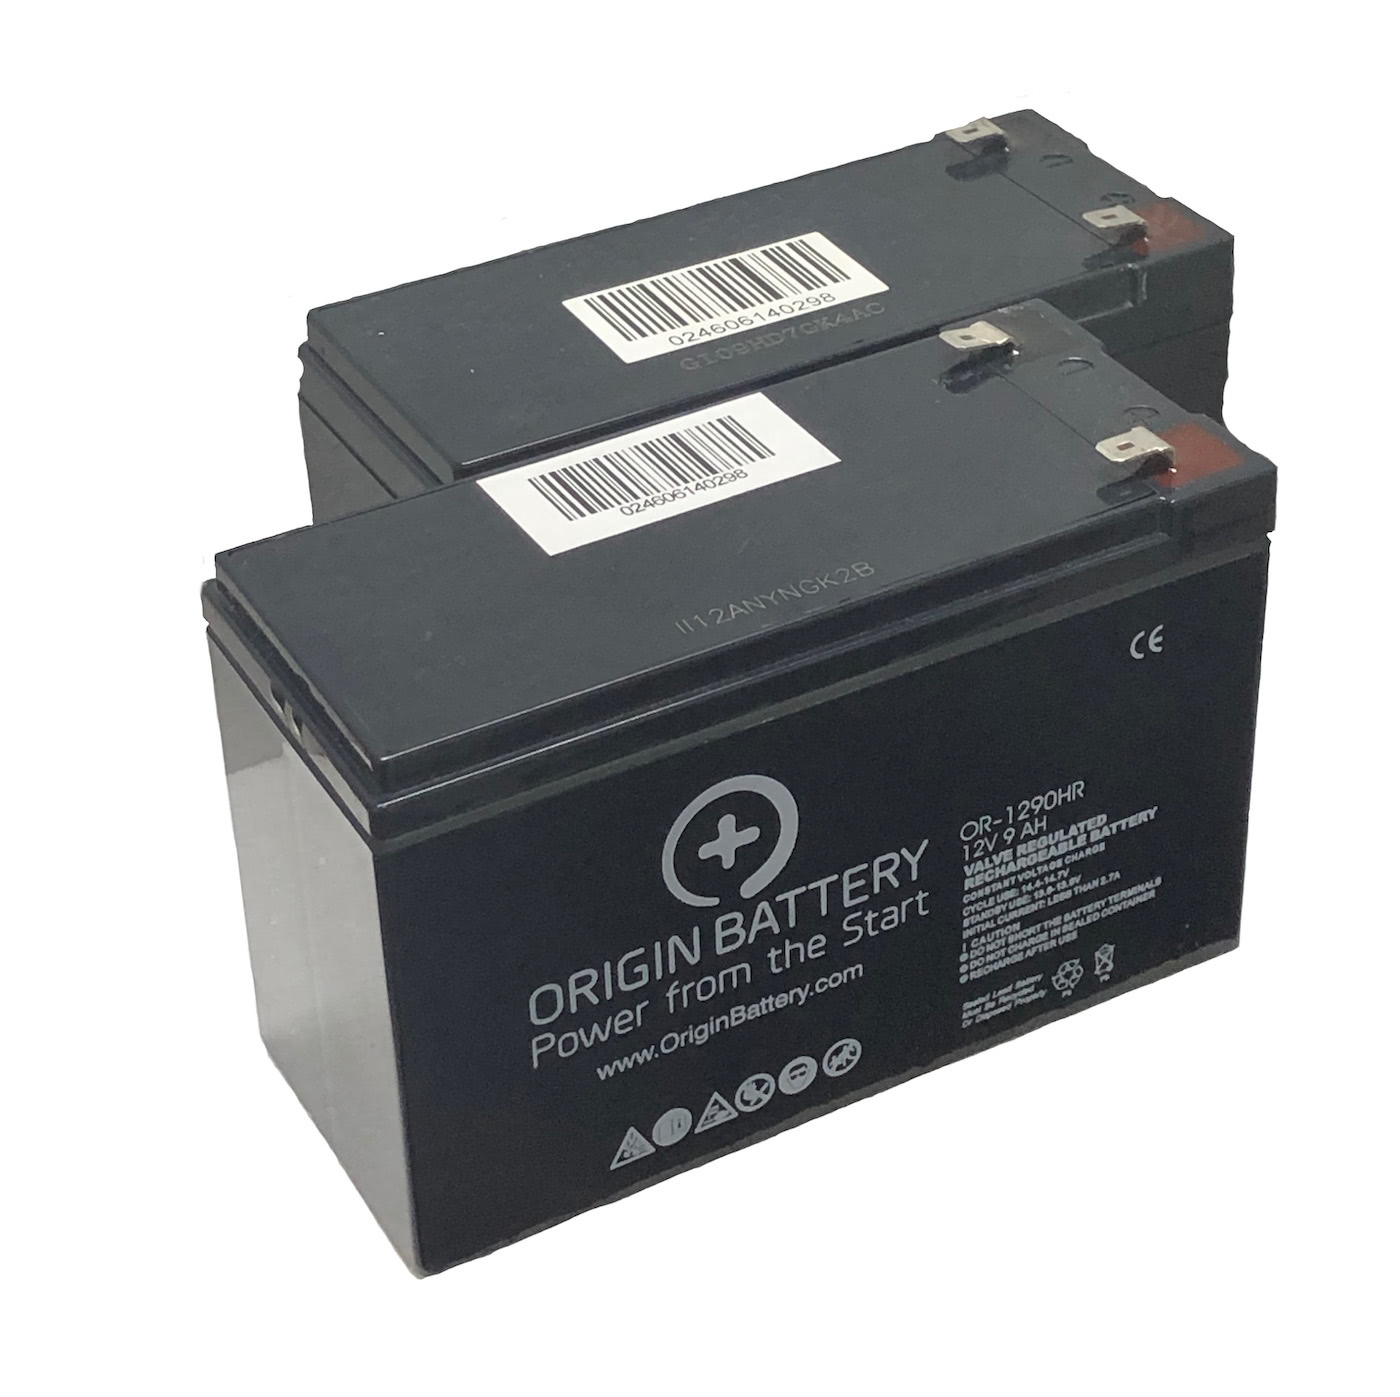 Razor 12V 9AH Battery Upgrade Kit Questions & Answers